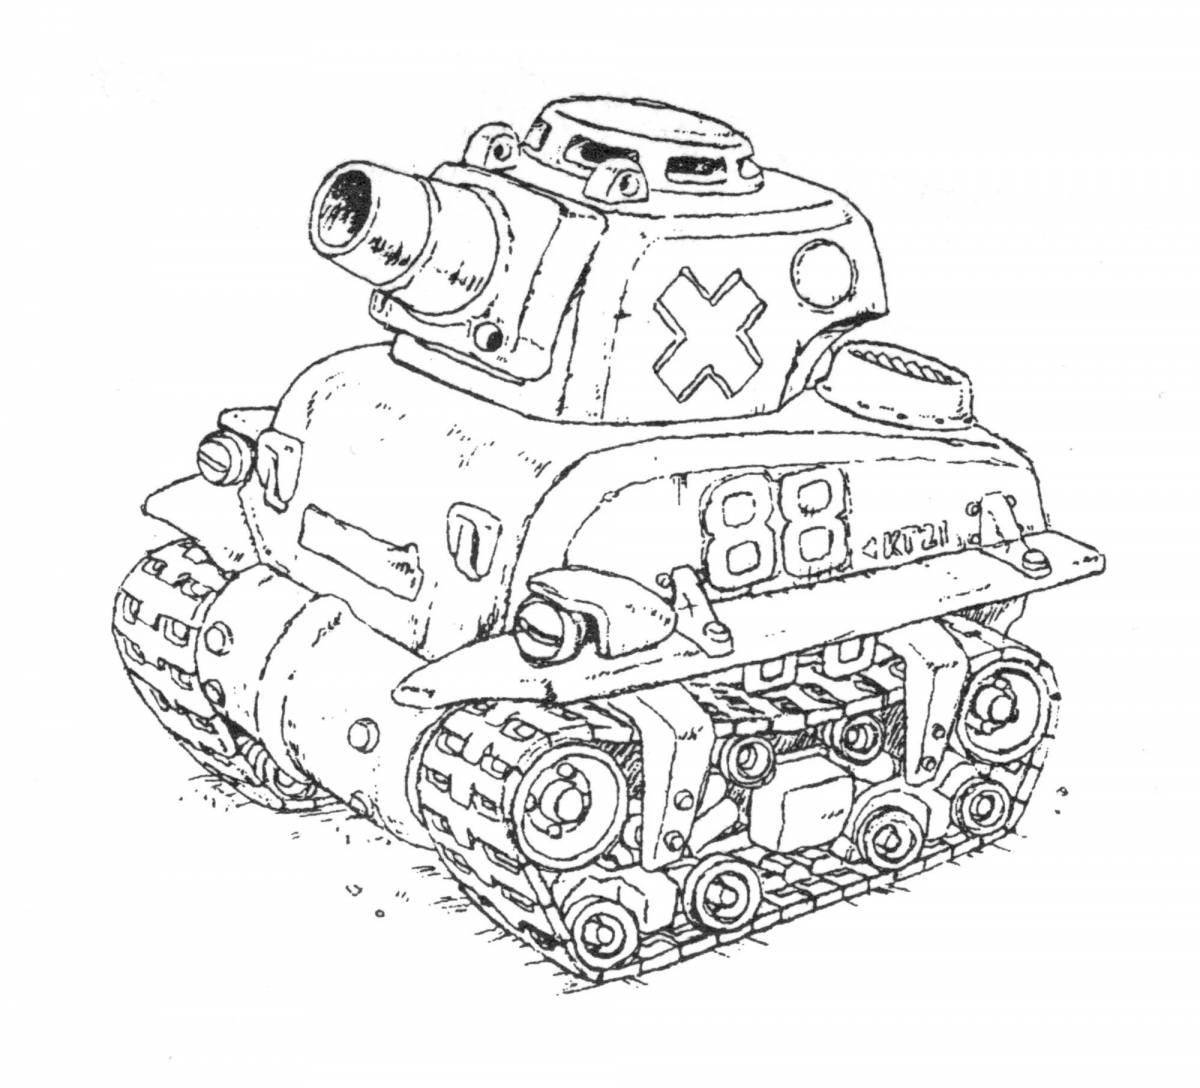 Funny cartoon tank coloring book for kids